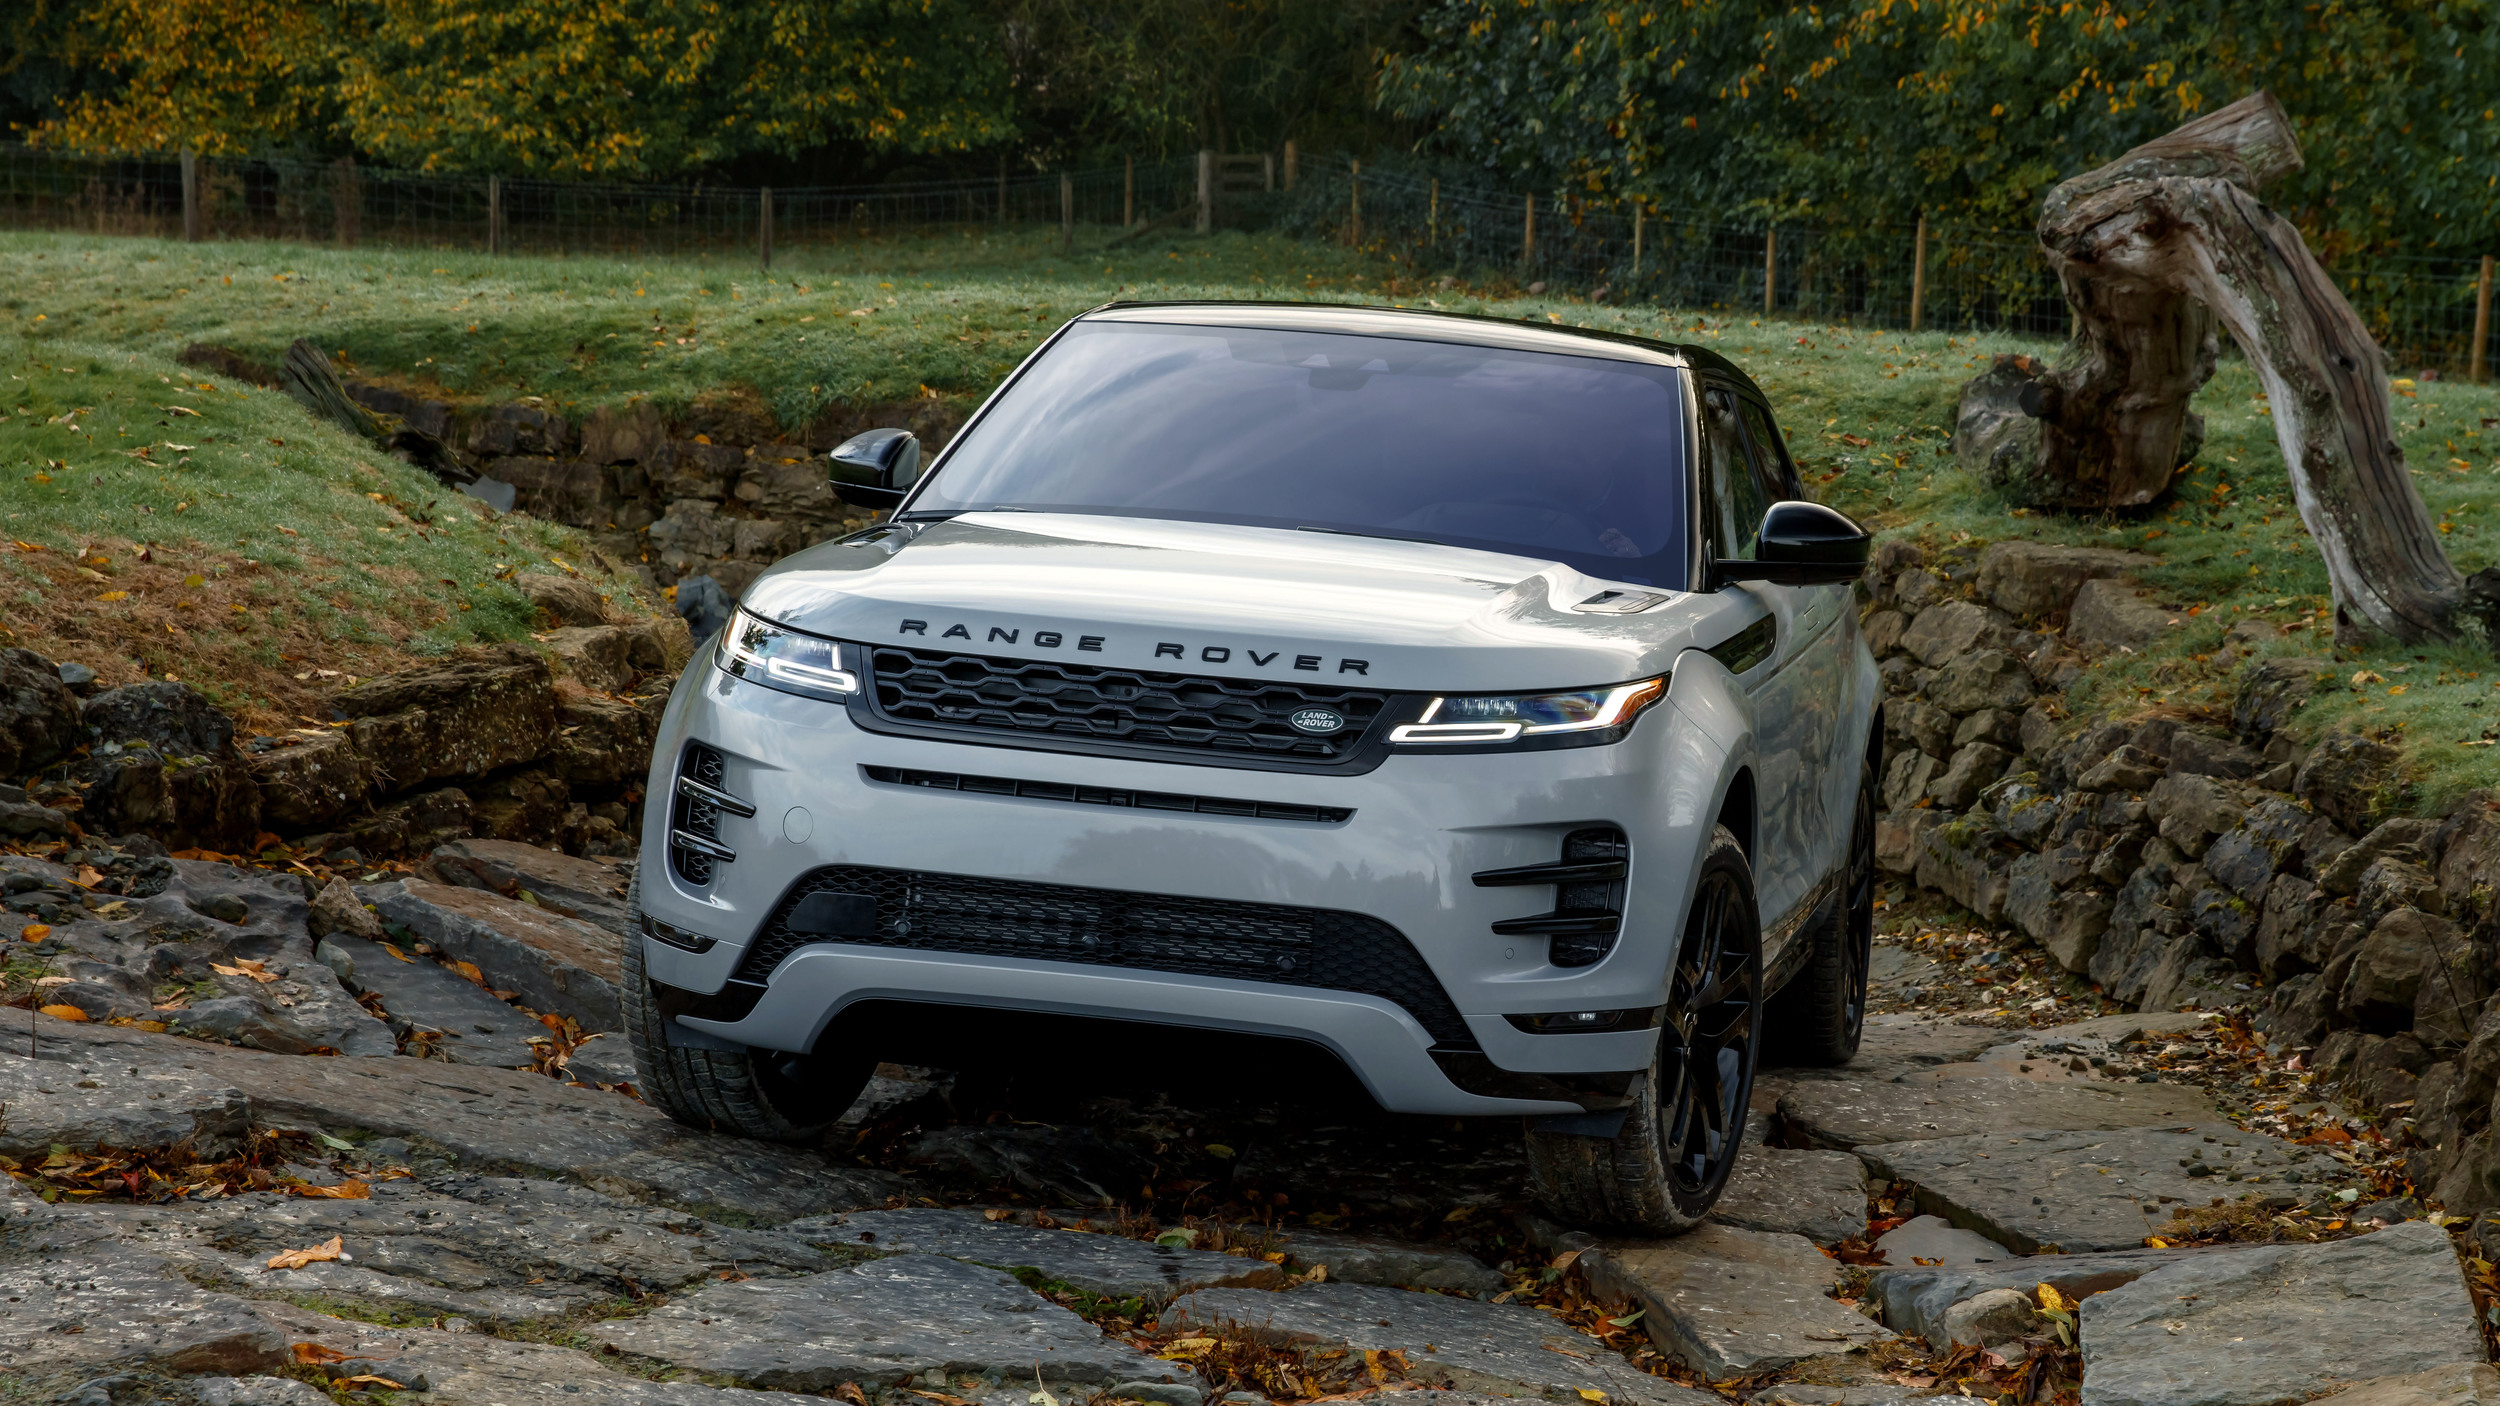 Land Rover Range Rover Evoque SUV: Models, Generations and Details